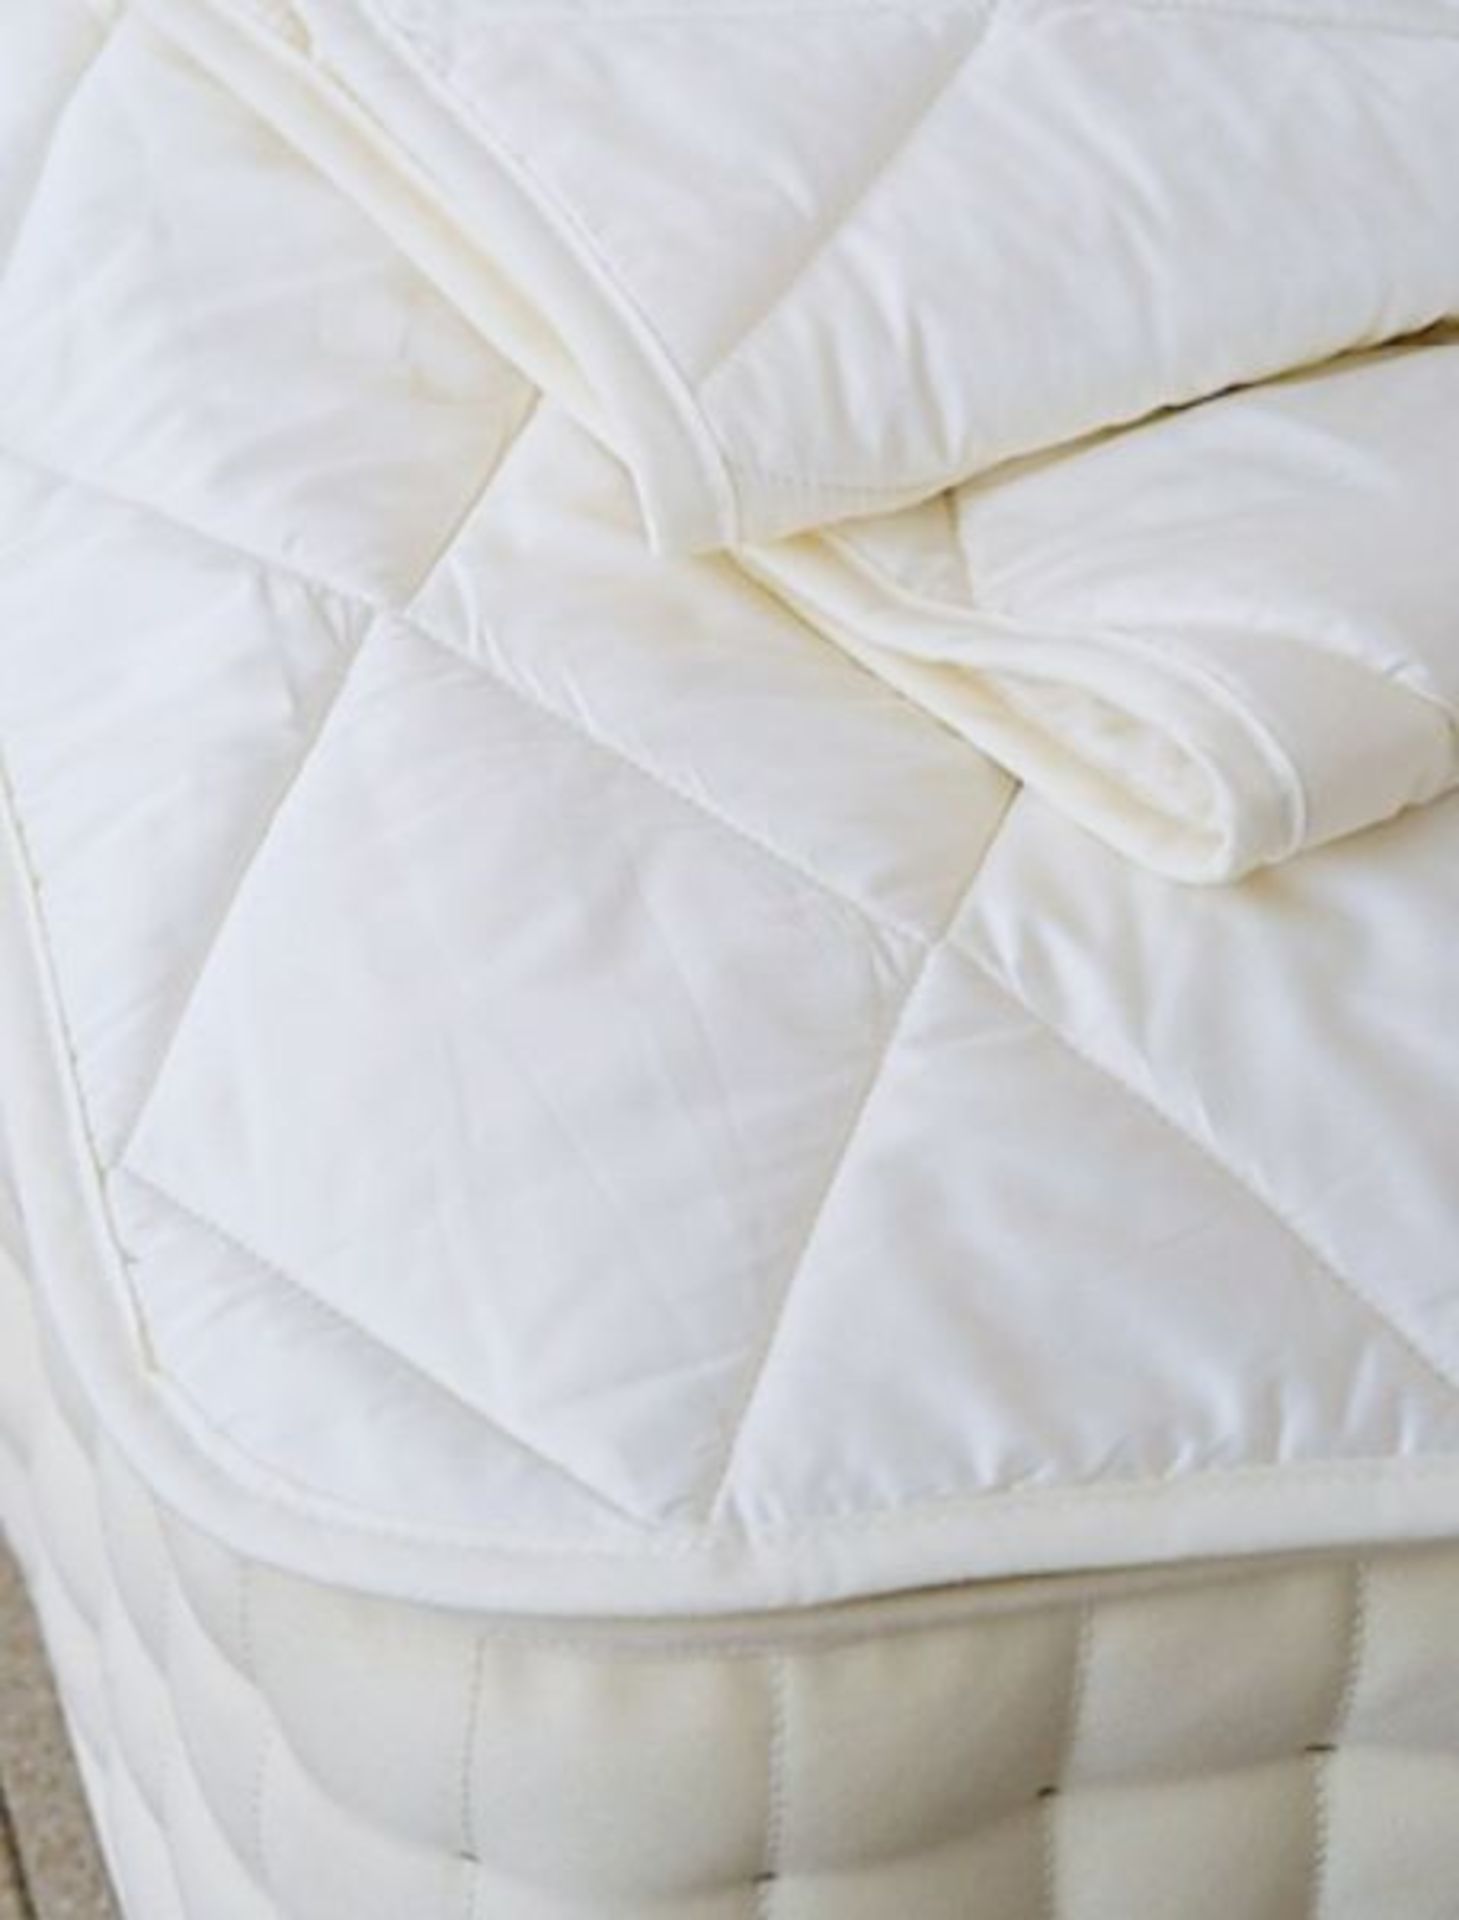 1 x VISPRING Quilted Mattress Protector - Dimensions 182x200cm - Ref: 1396831 P3 - CL087 - Location: